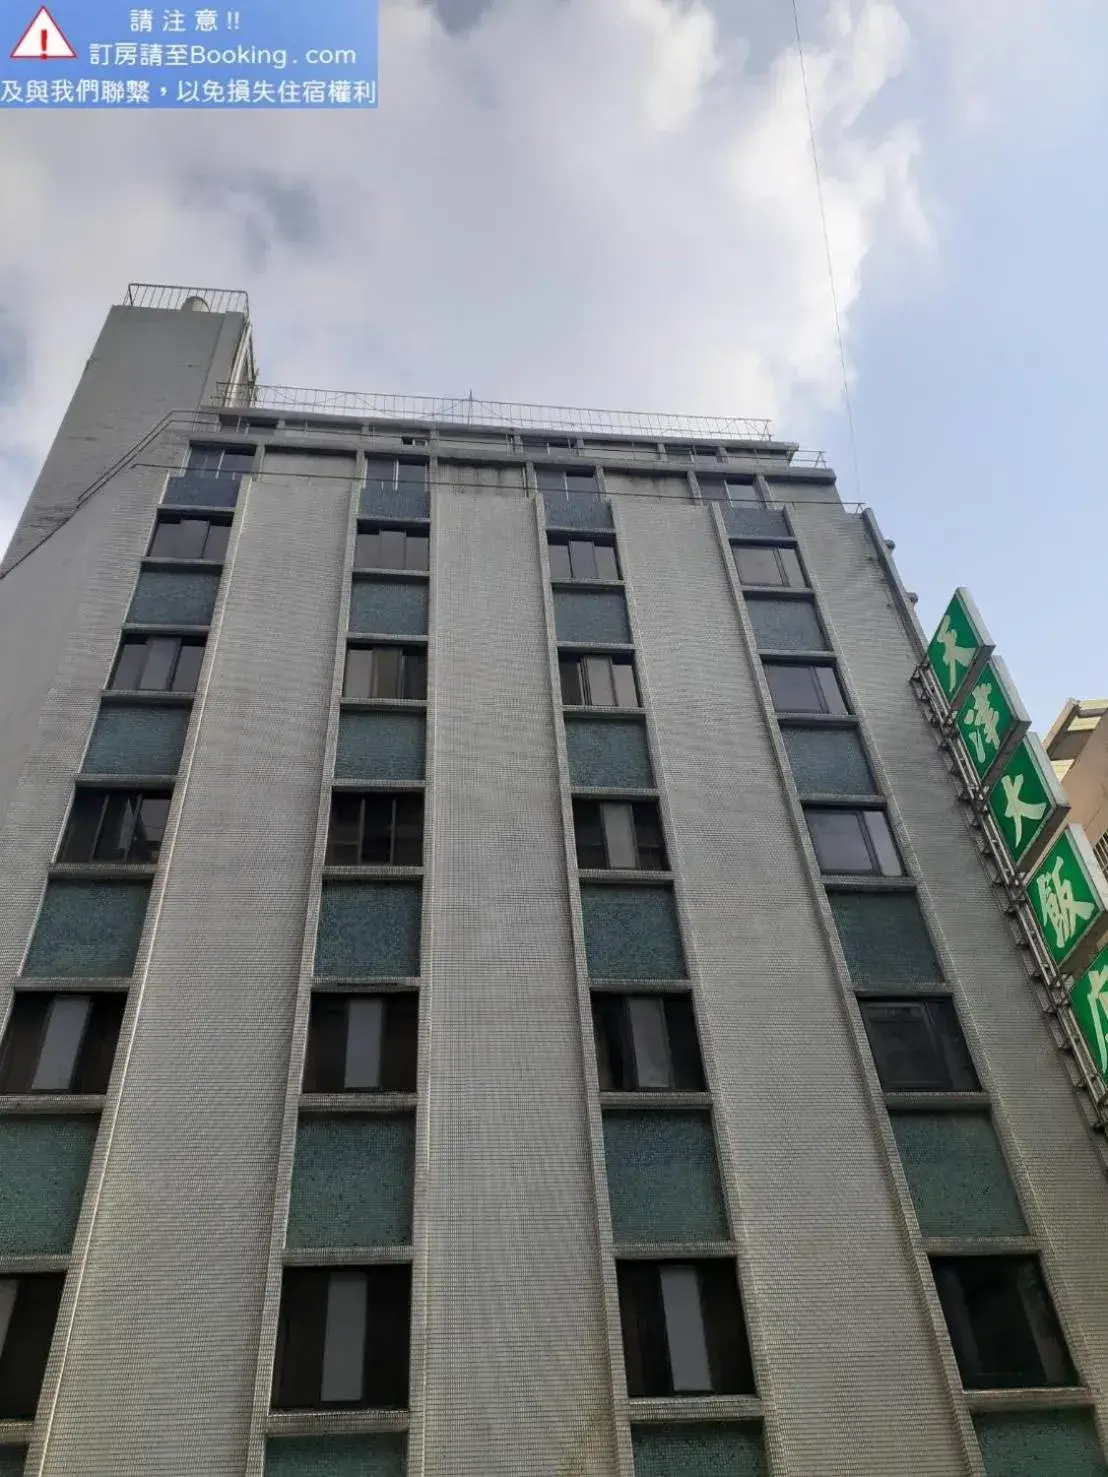 Property Building in Tien Chin Hotel